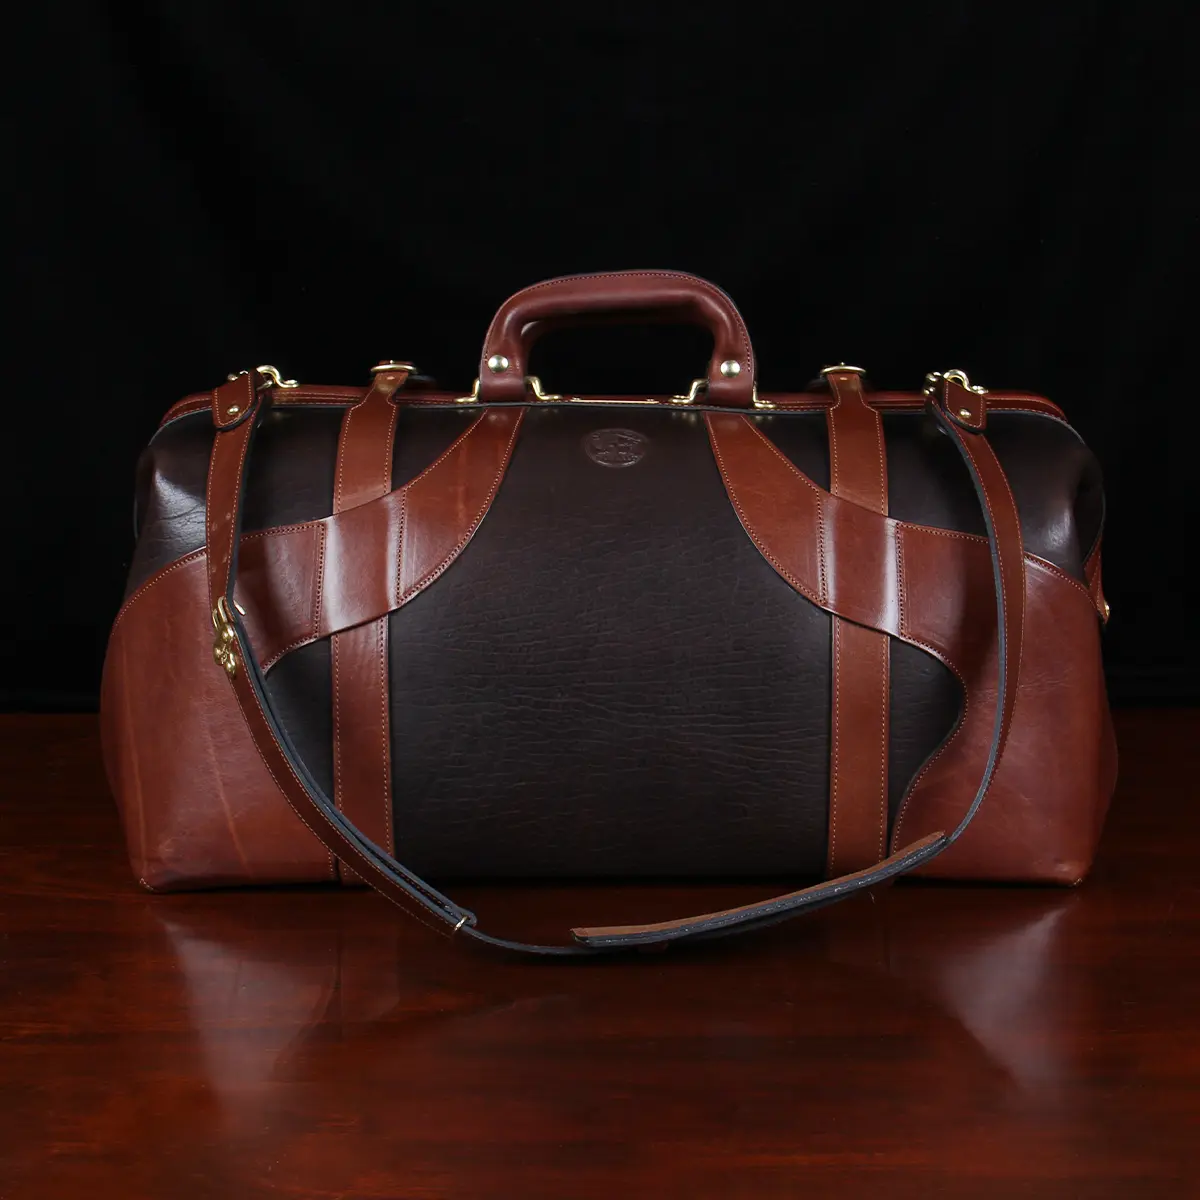 Leather Lv Duffle Bag, For Travel